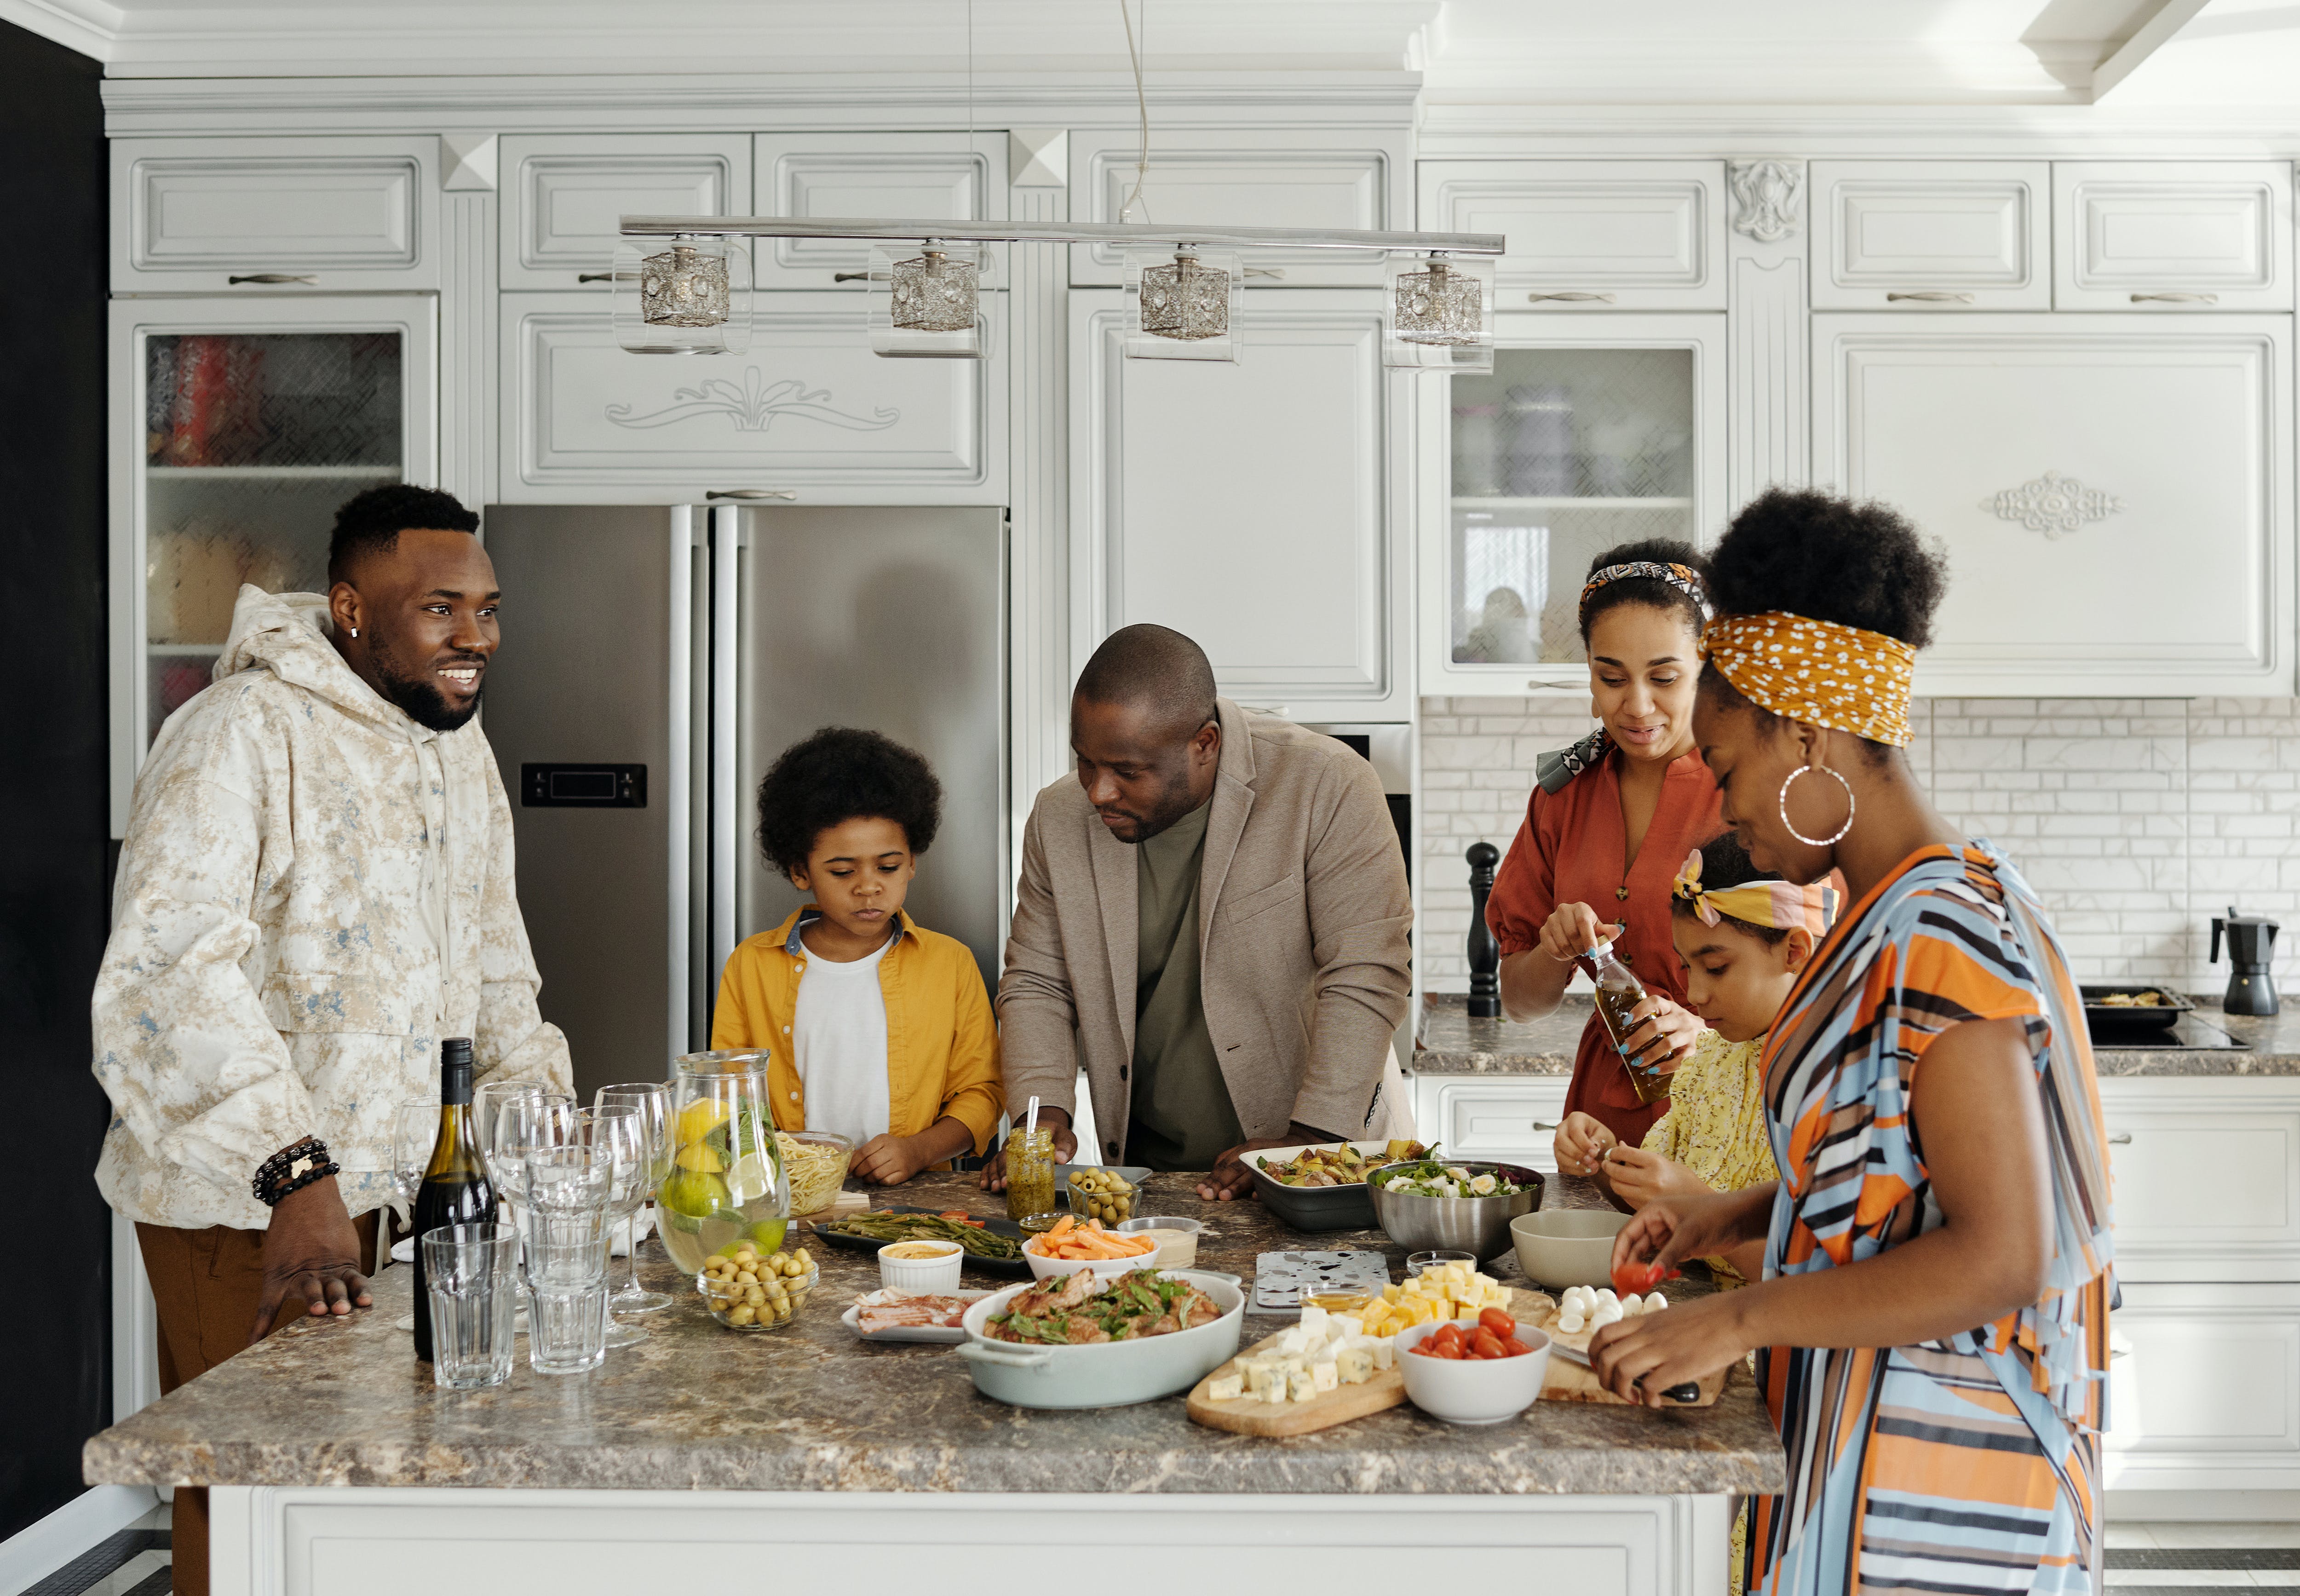 A family of six gather and talk around food in a kitchen